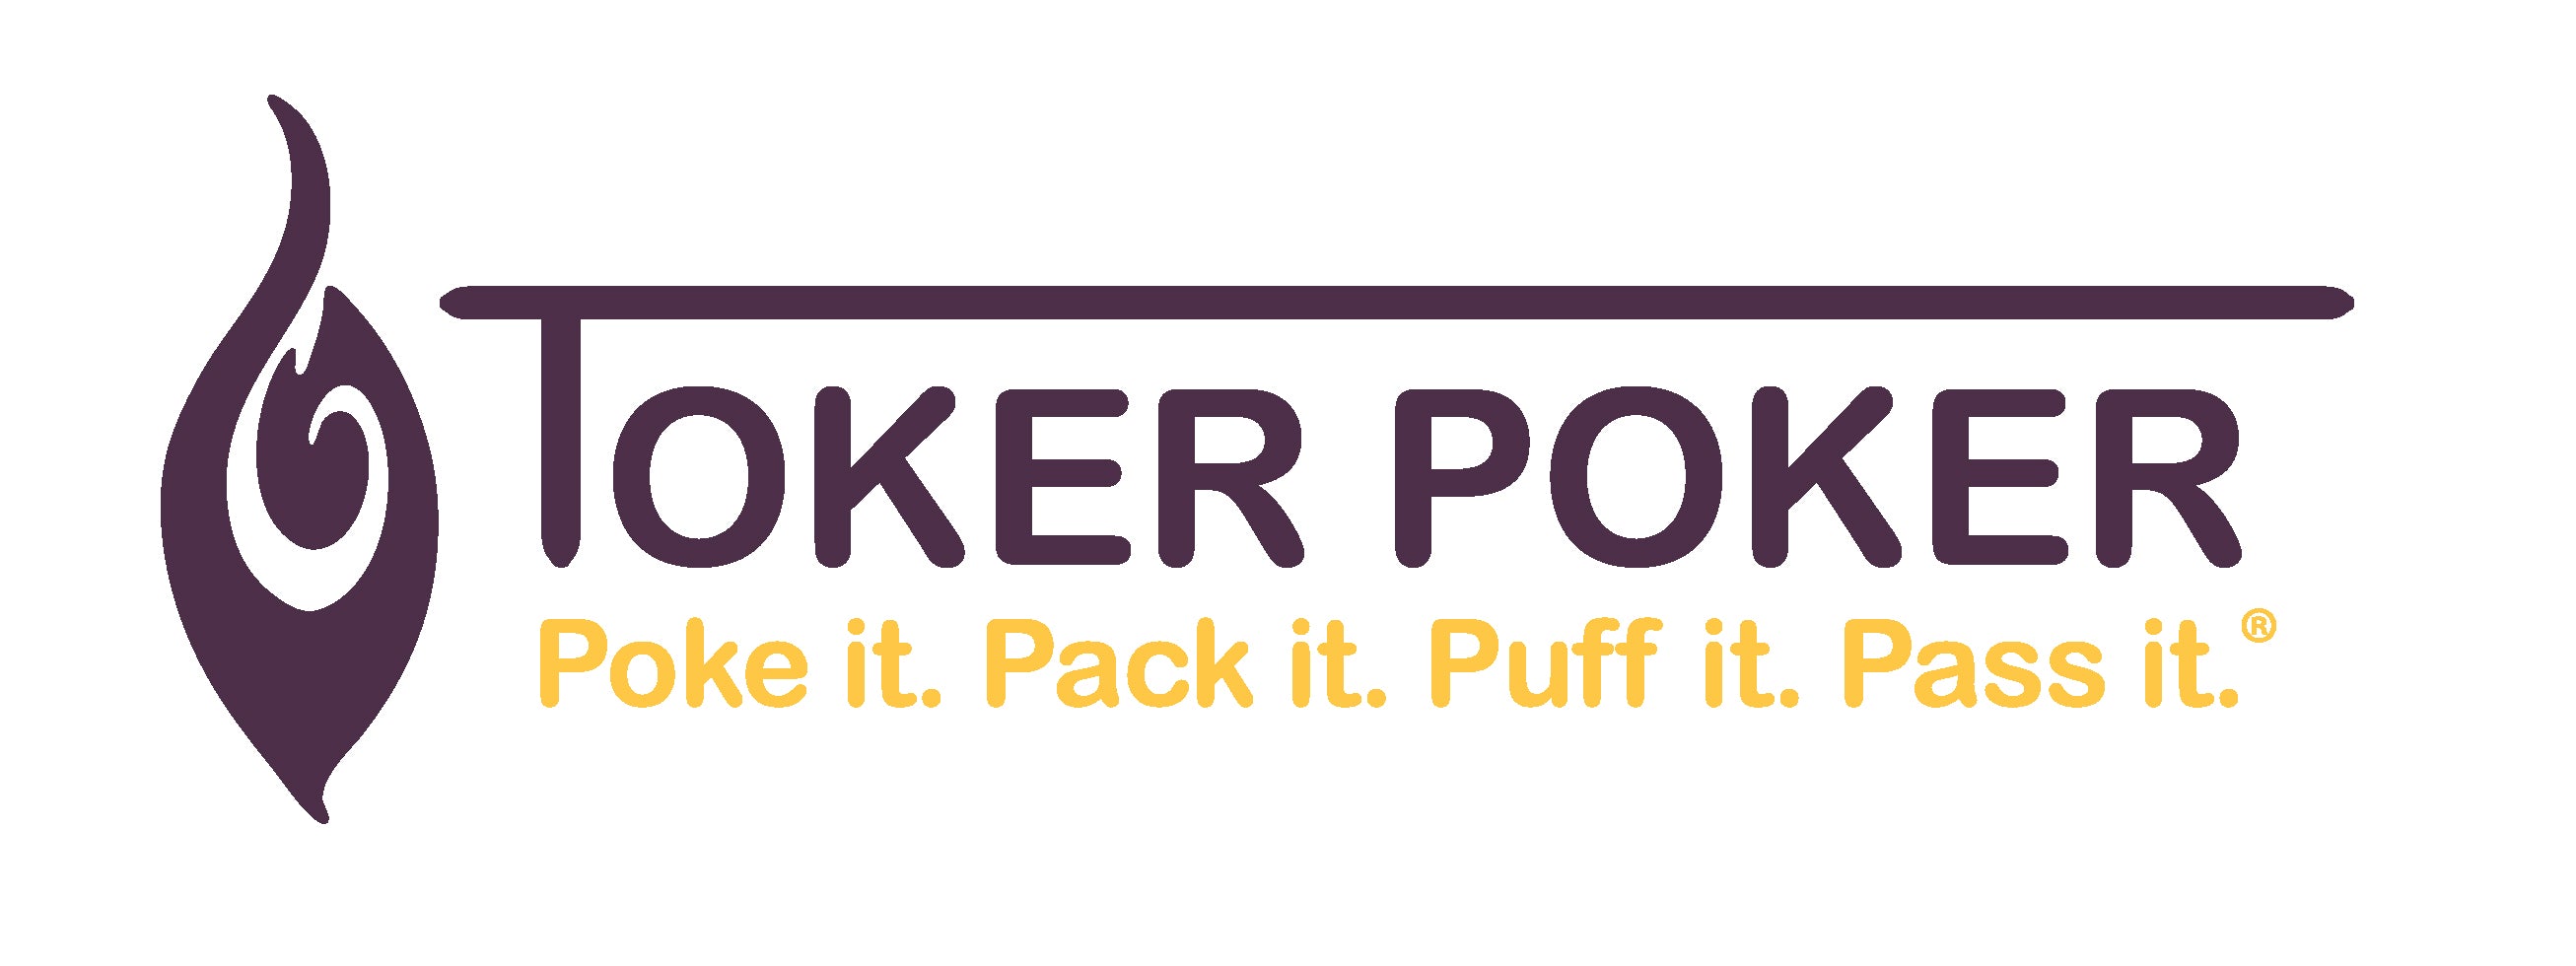 TOKER POKER - Multi-Tool Lighter Sleeve (Pick a Color) - The Dab Lab